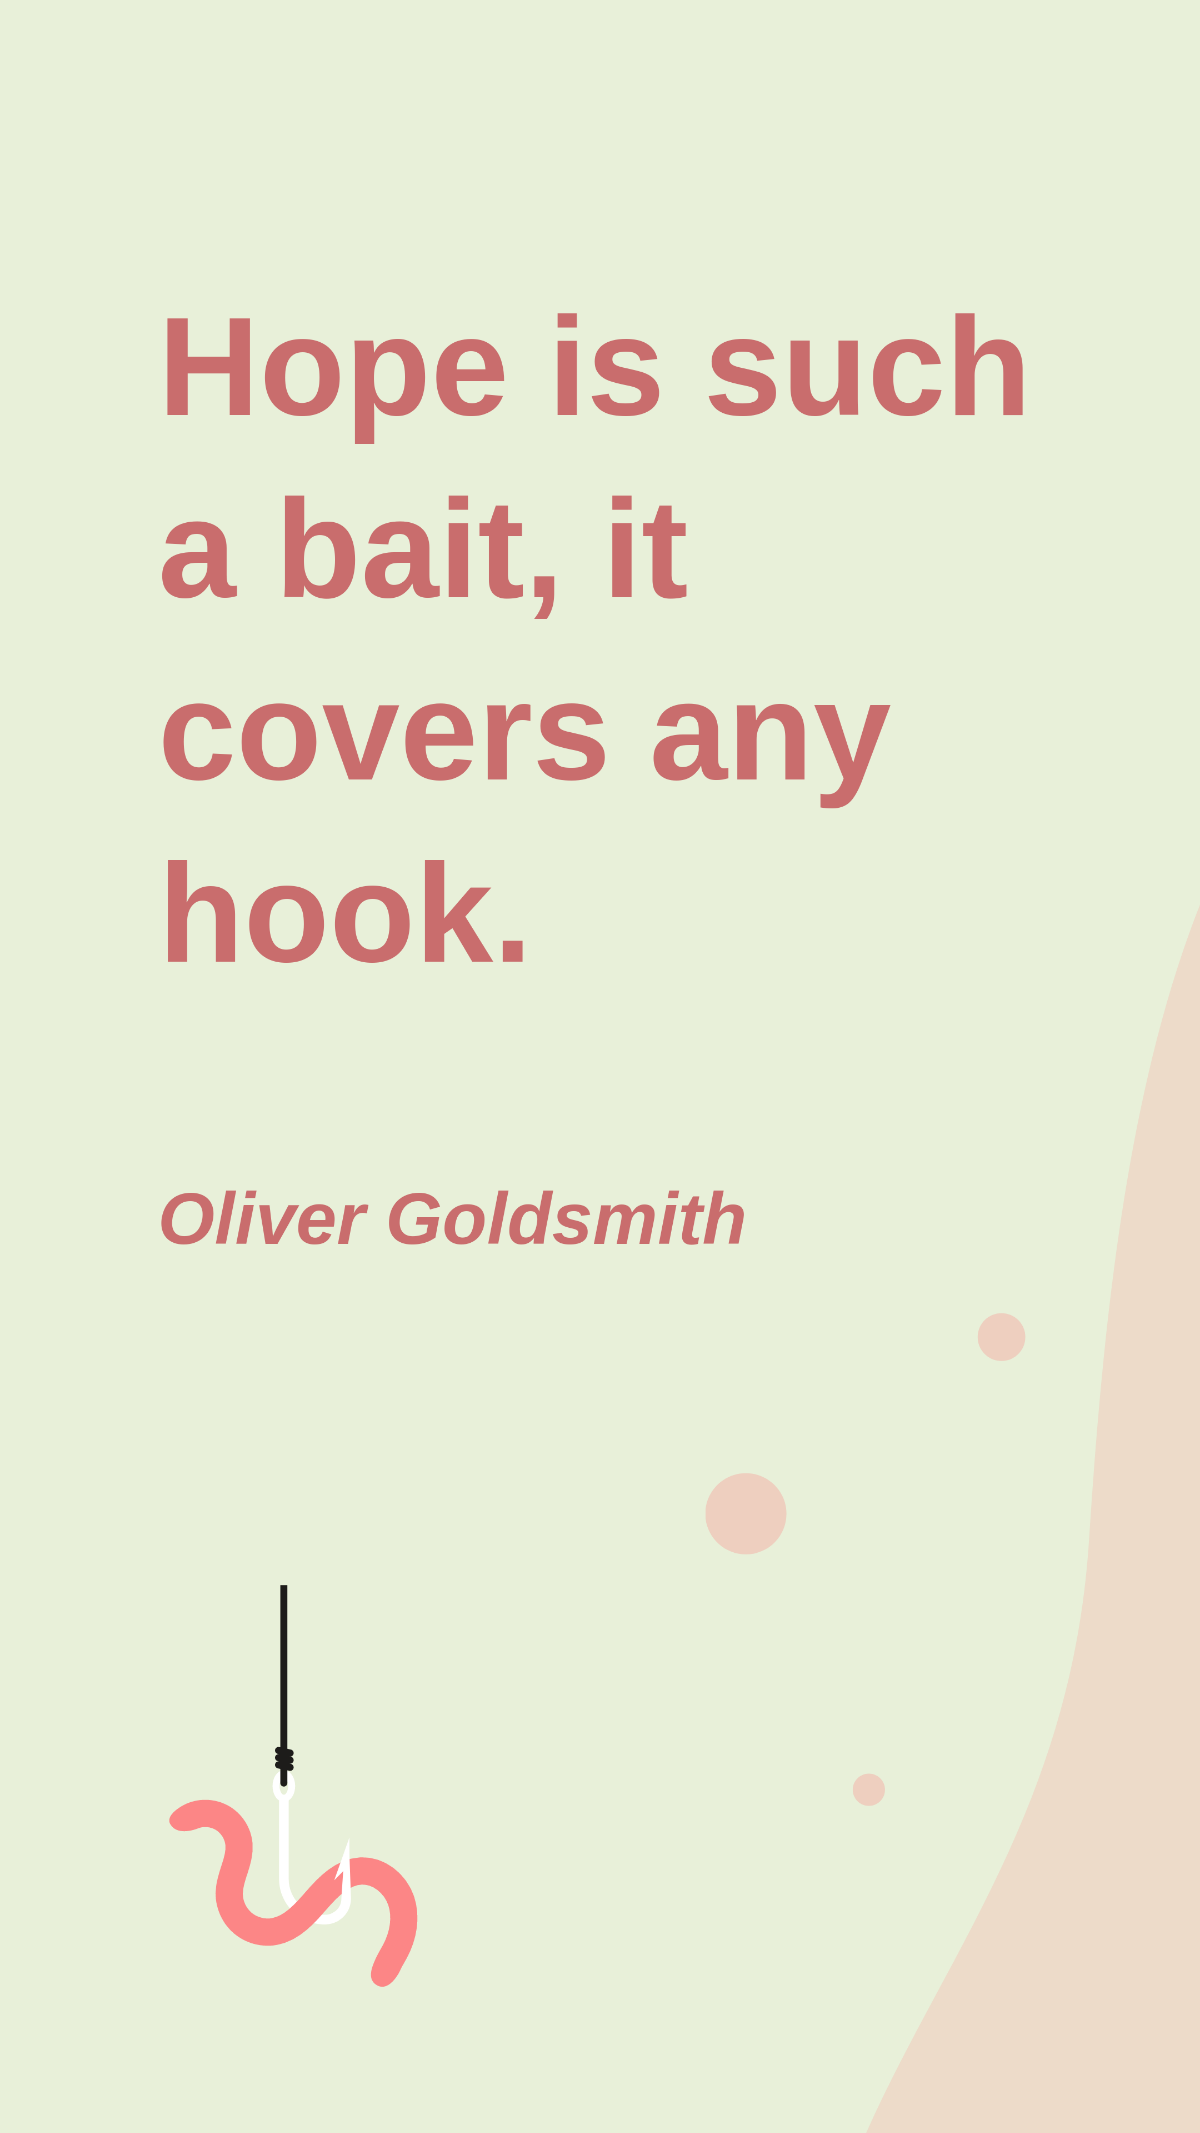 Oliver Goldsmith - Hope is such a bait, it covers any hook. Template